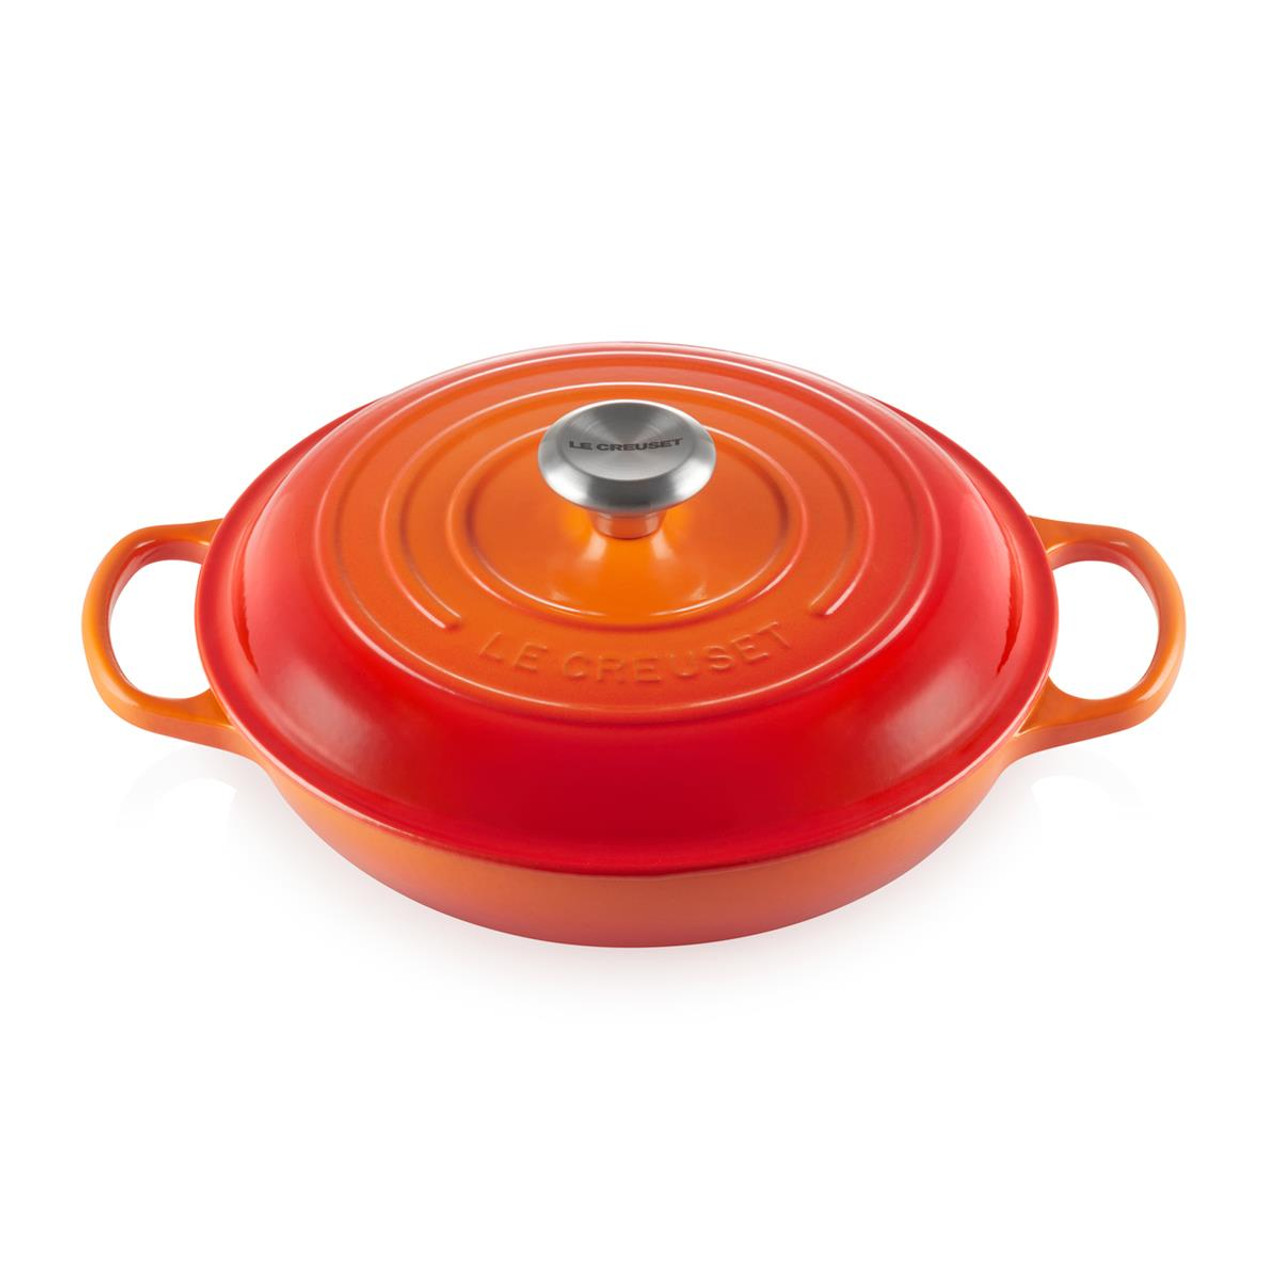 Is the Le Creuset 26cm cast iron casserole dish dishwasher and oven safe?